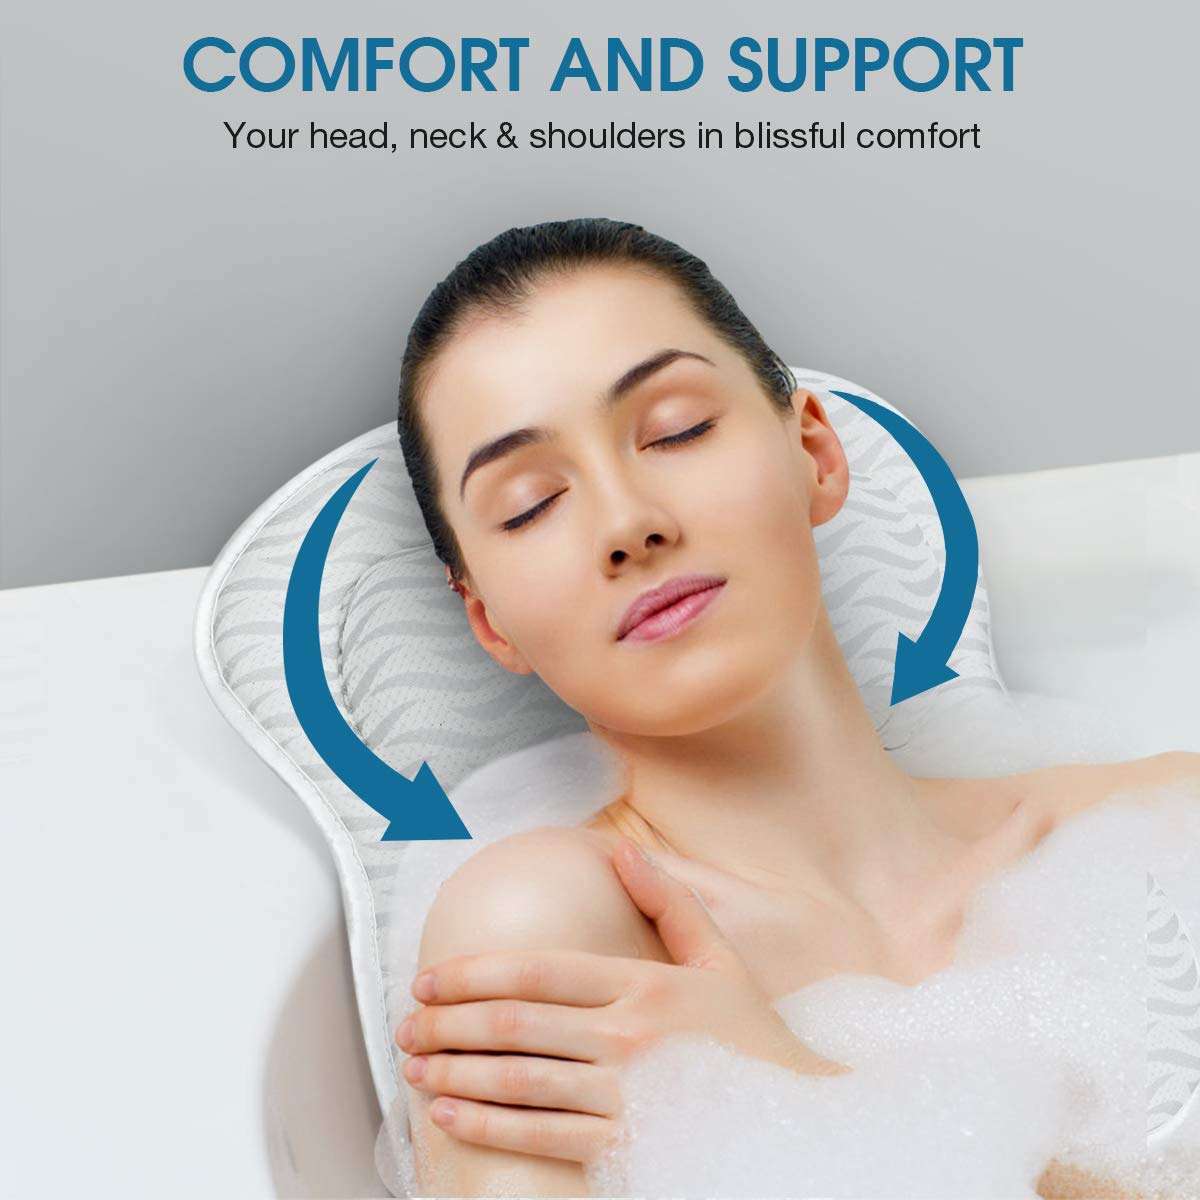 YEERSWAG-Bath-Pillow-Spirity-Ergonomic-with-Neck-and-Back-Support-Comfortable-Bathtub-Pillows-for-Re-1945900-2